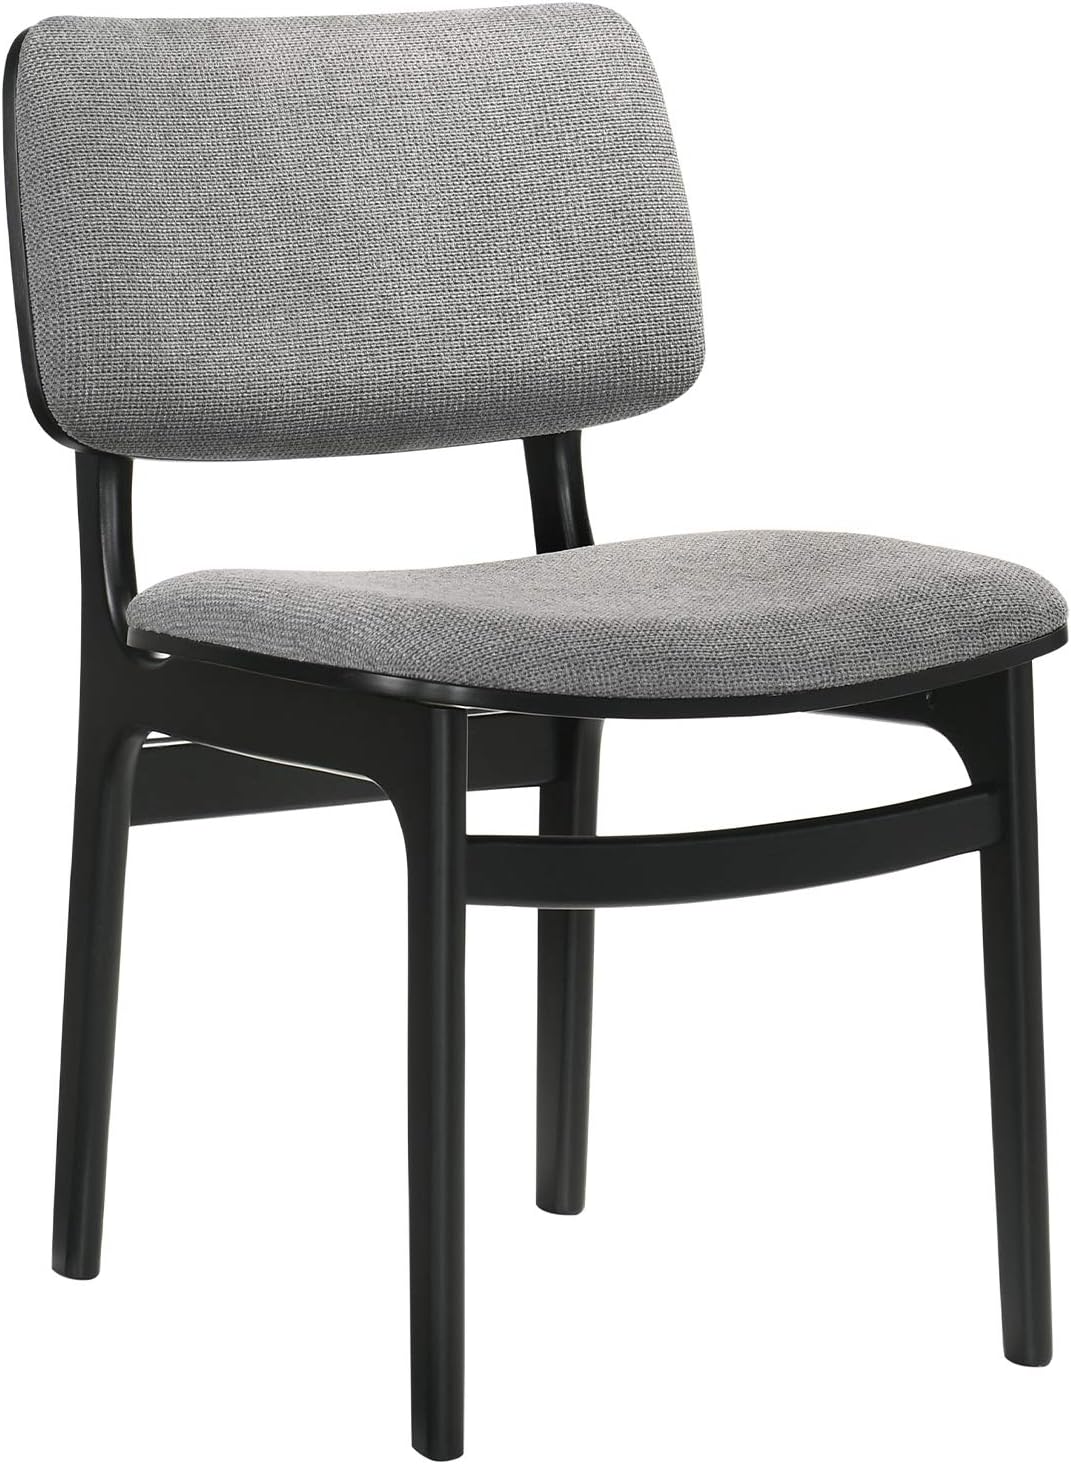 Armen Living Lima Wood Dining Accent Chairs Finish Fabric-Set of 2, 20" Wide, Black/Grey